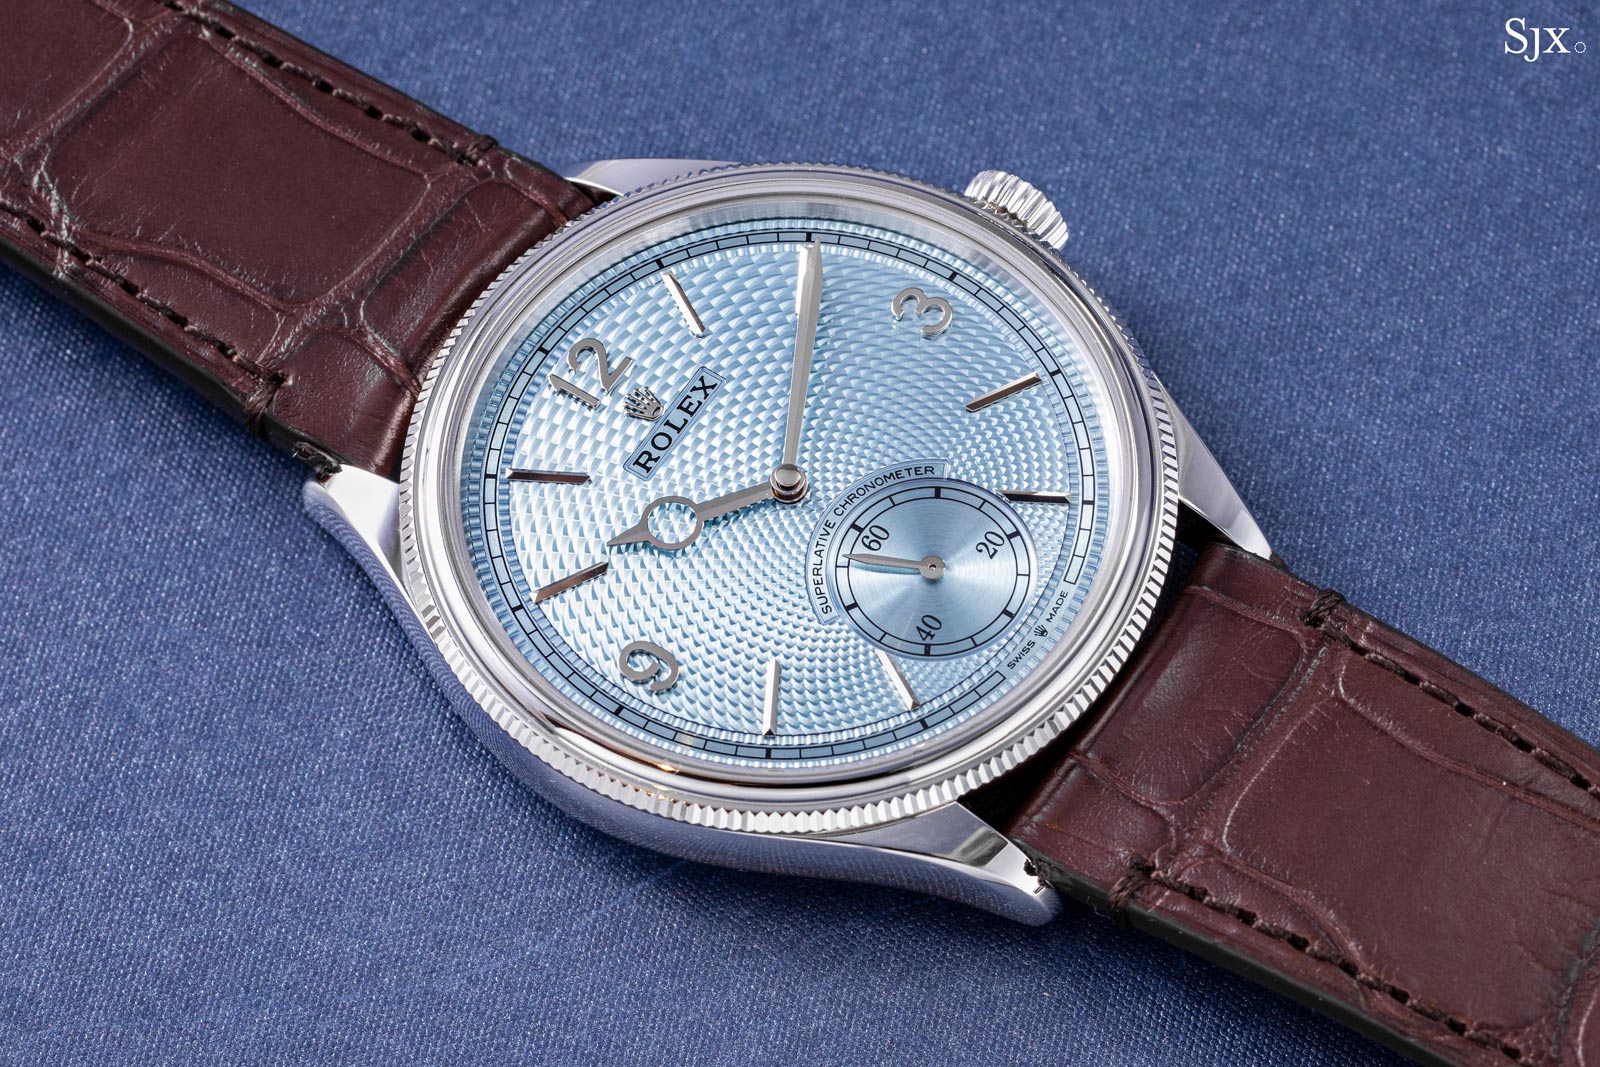 Hands On: Rolex Perpetual 1908 in Platinum “Ice Blue” | SJX Watches